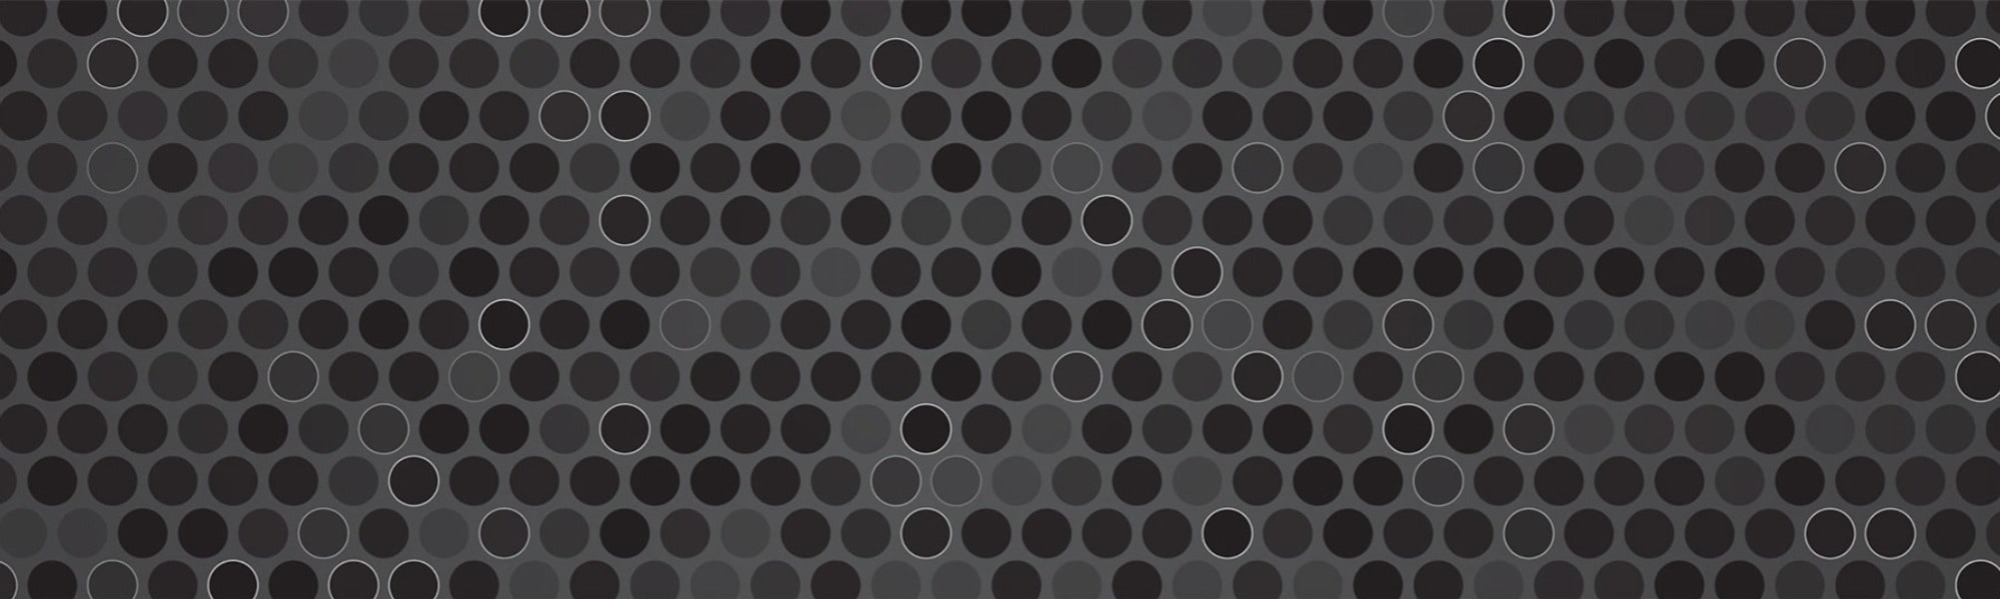 An abstract pattern of overlapping circles in shades of gray, creating a metallic mesh-like texture.